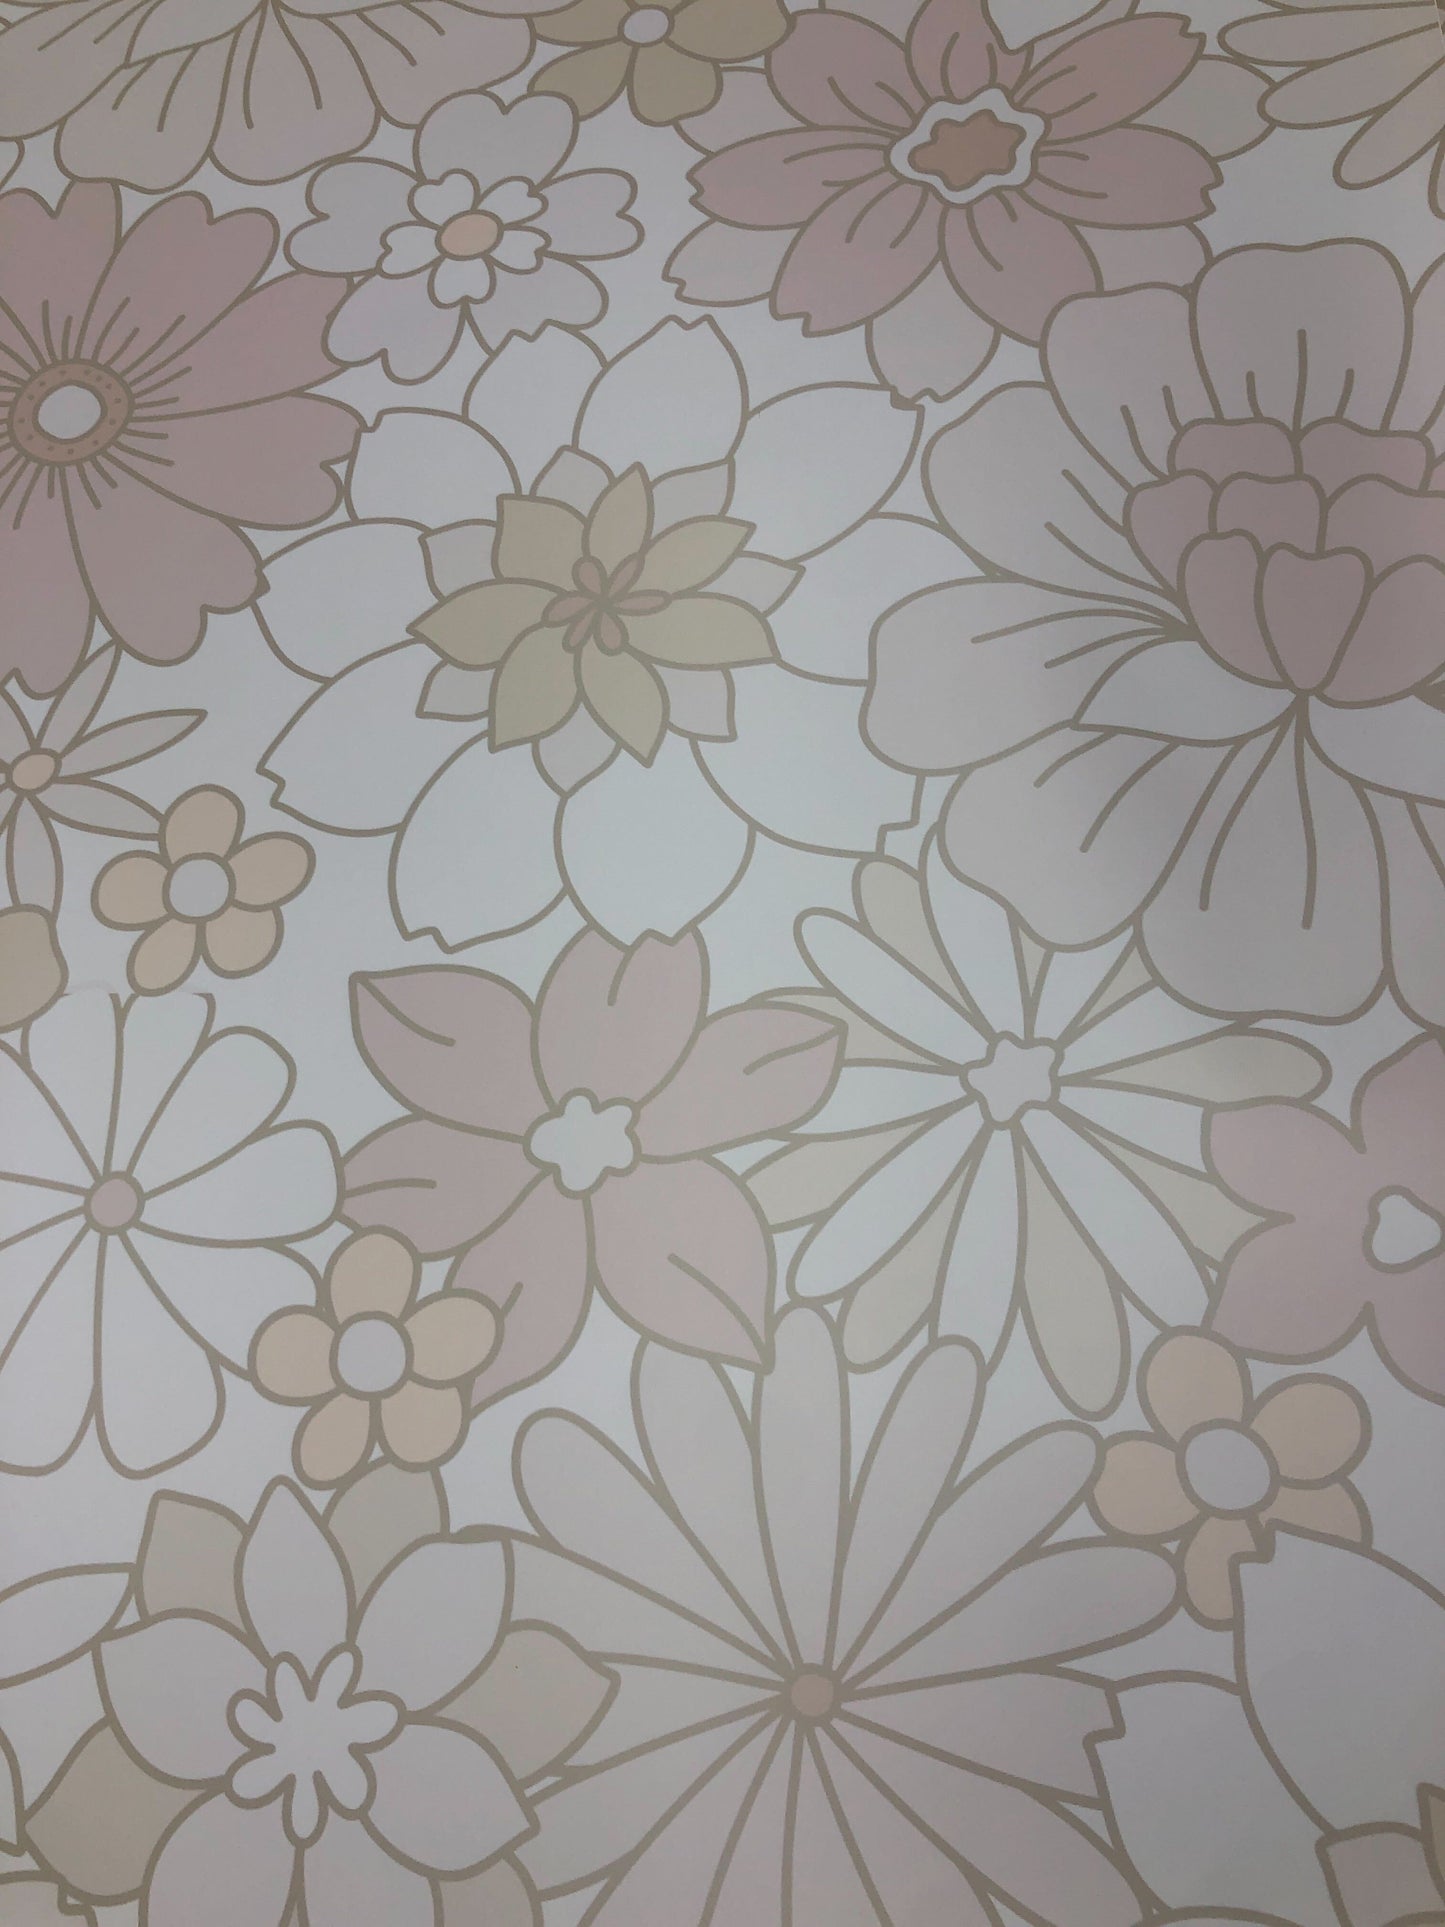 CLEARANCE Muted Retro Blooms Wallpaper 4 rolls of 24"x96"